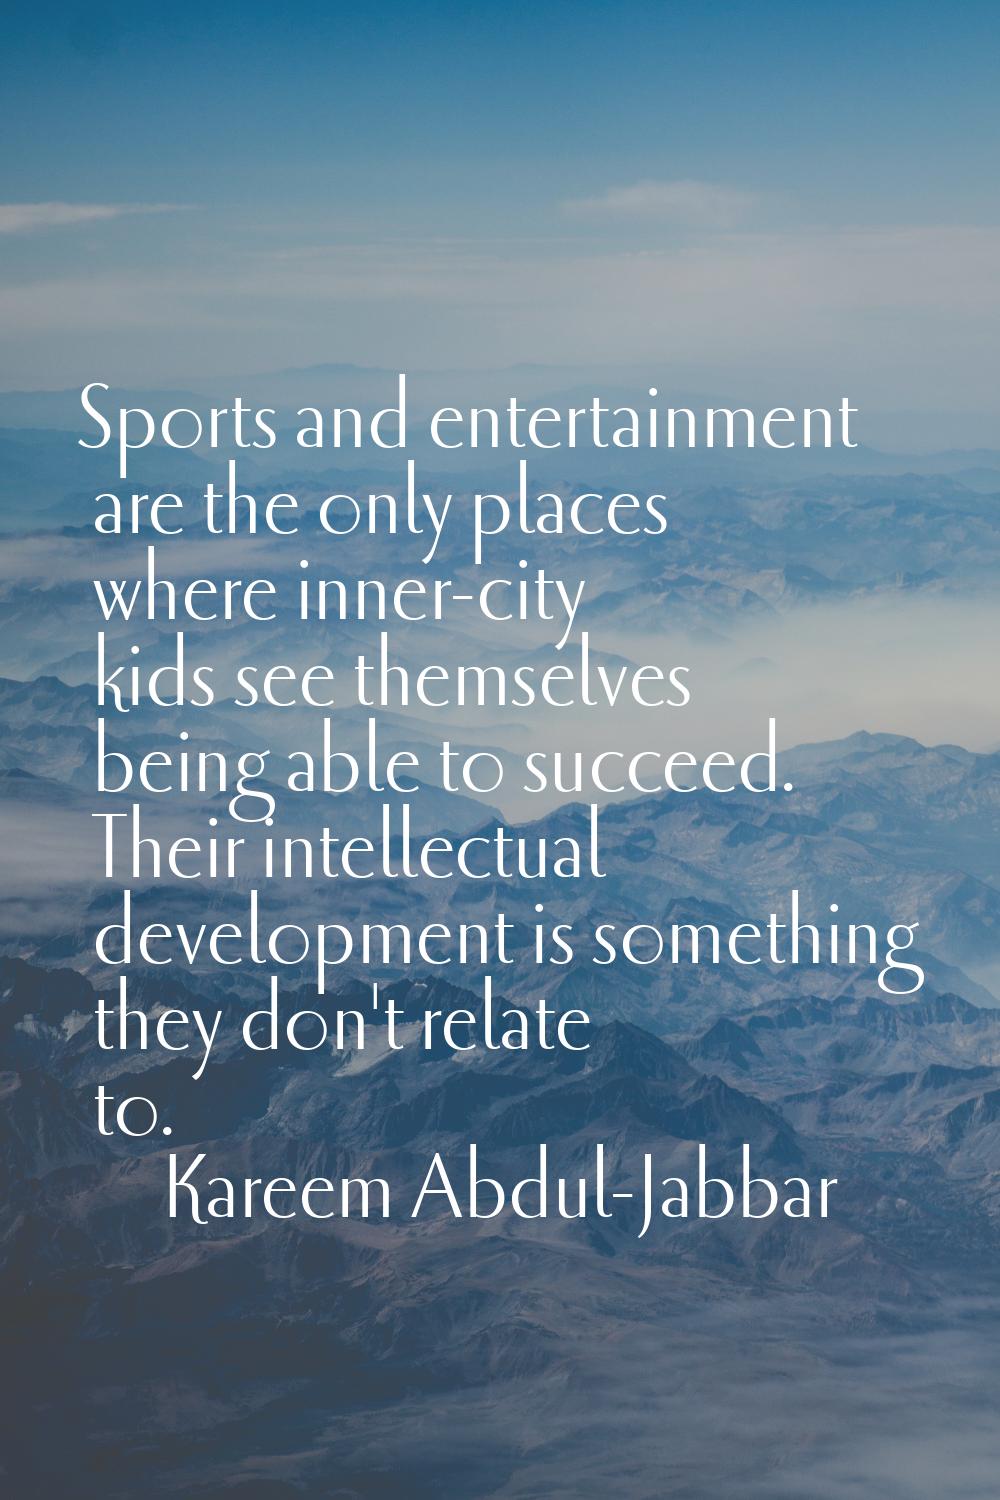 Sports and entertainment are the only places where inner-city kids see themselves being able to suc